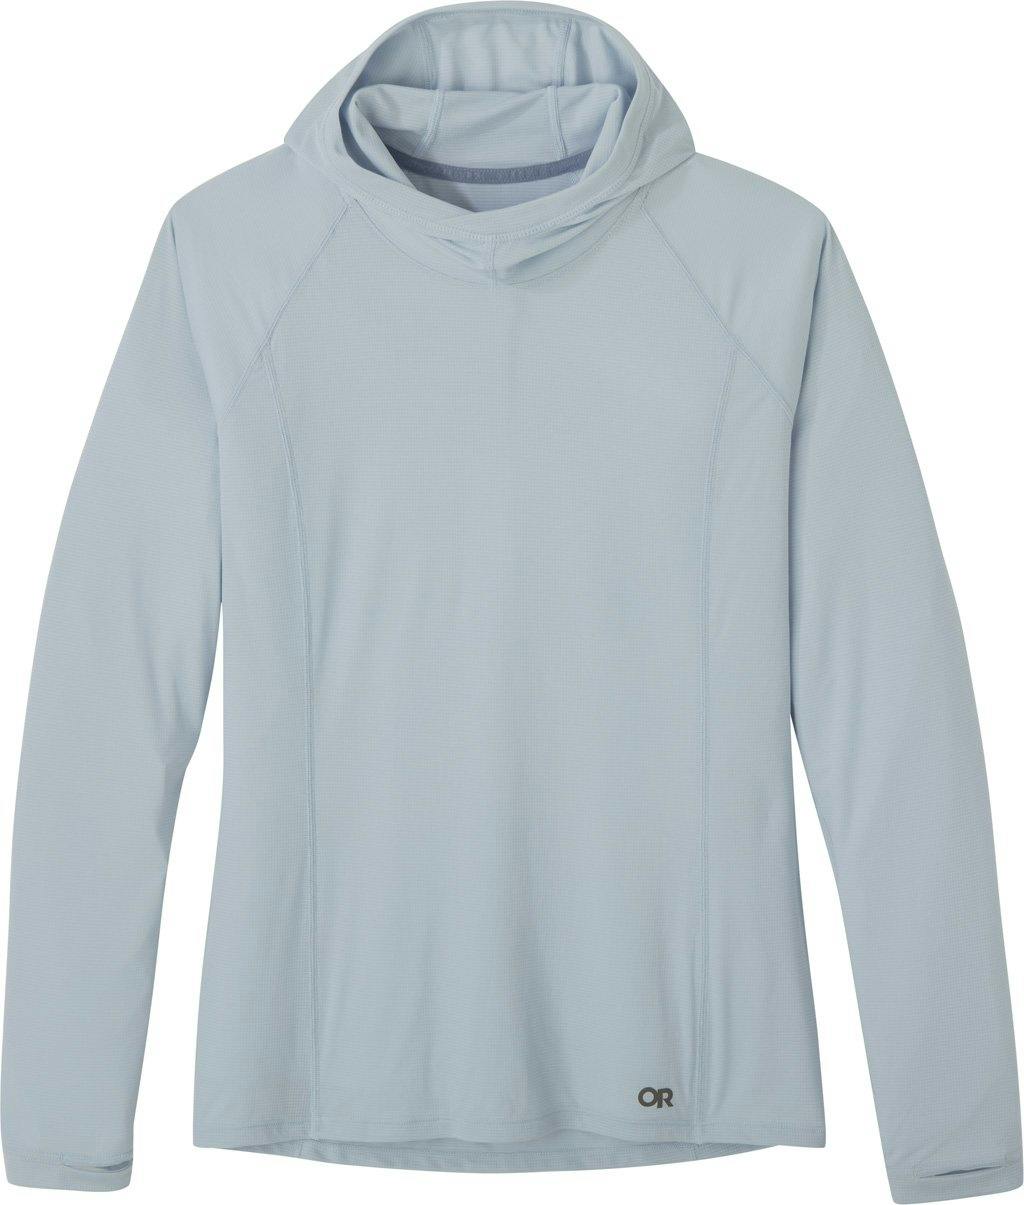 Product image for Echo Hoodie - Women's